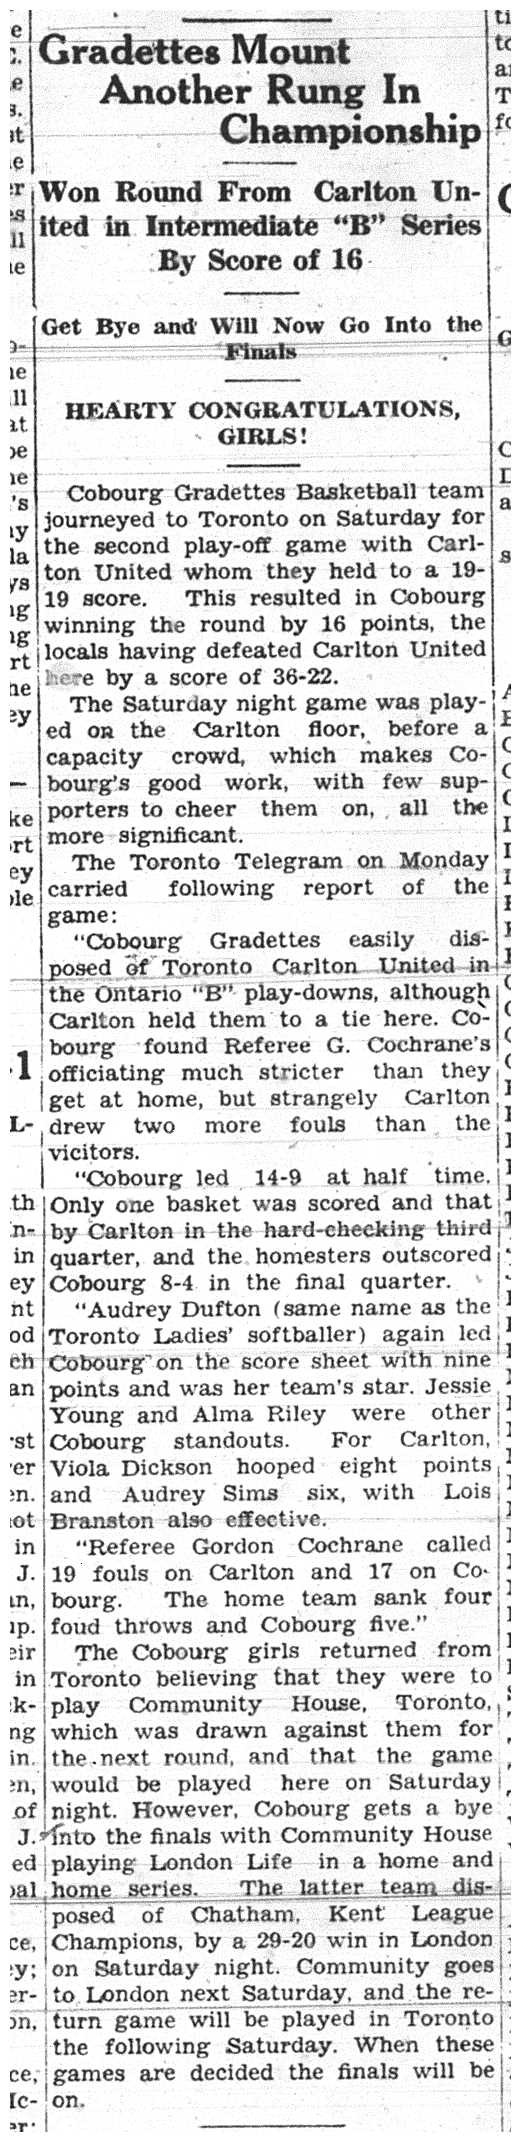 1938-03-17 Basketball -Ladies win-into finals